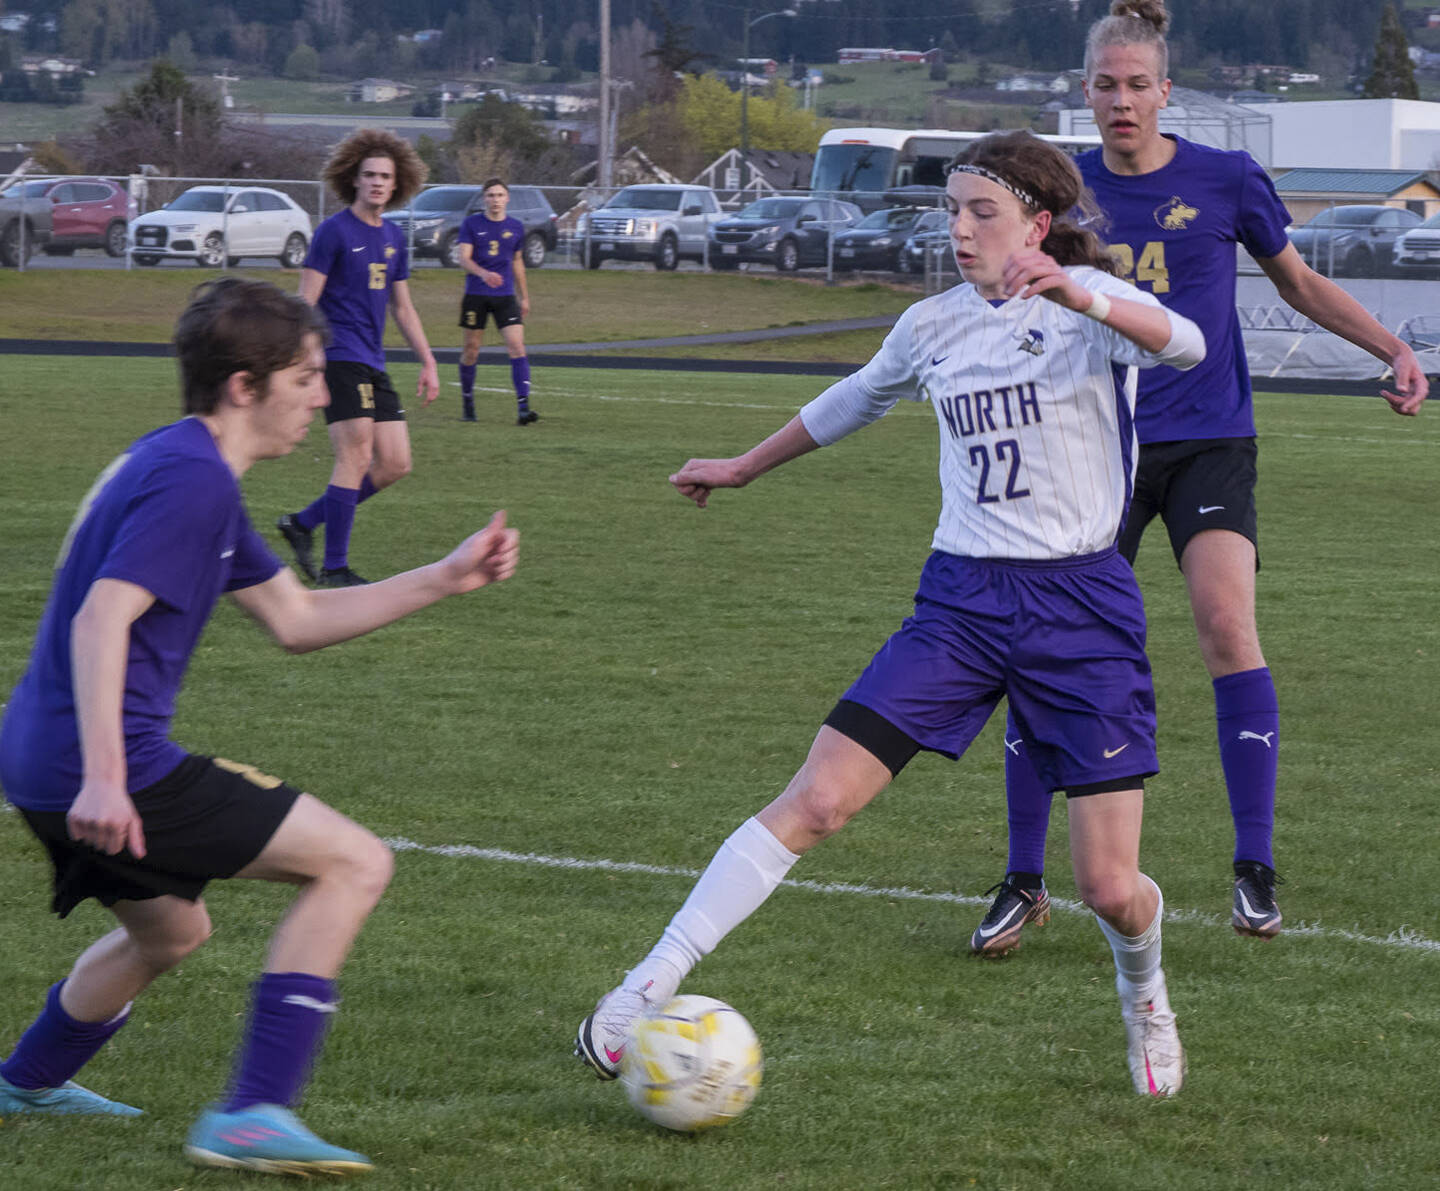 North Kitsap's Harper Sabari dribbles around a Wolve defender in their game April 25 in Sequim. The Vikings picked up a 2-0 victory. Emily Matthiessen/Sequim Gazette